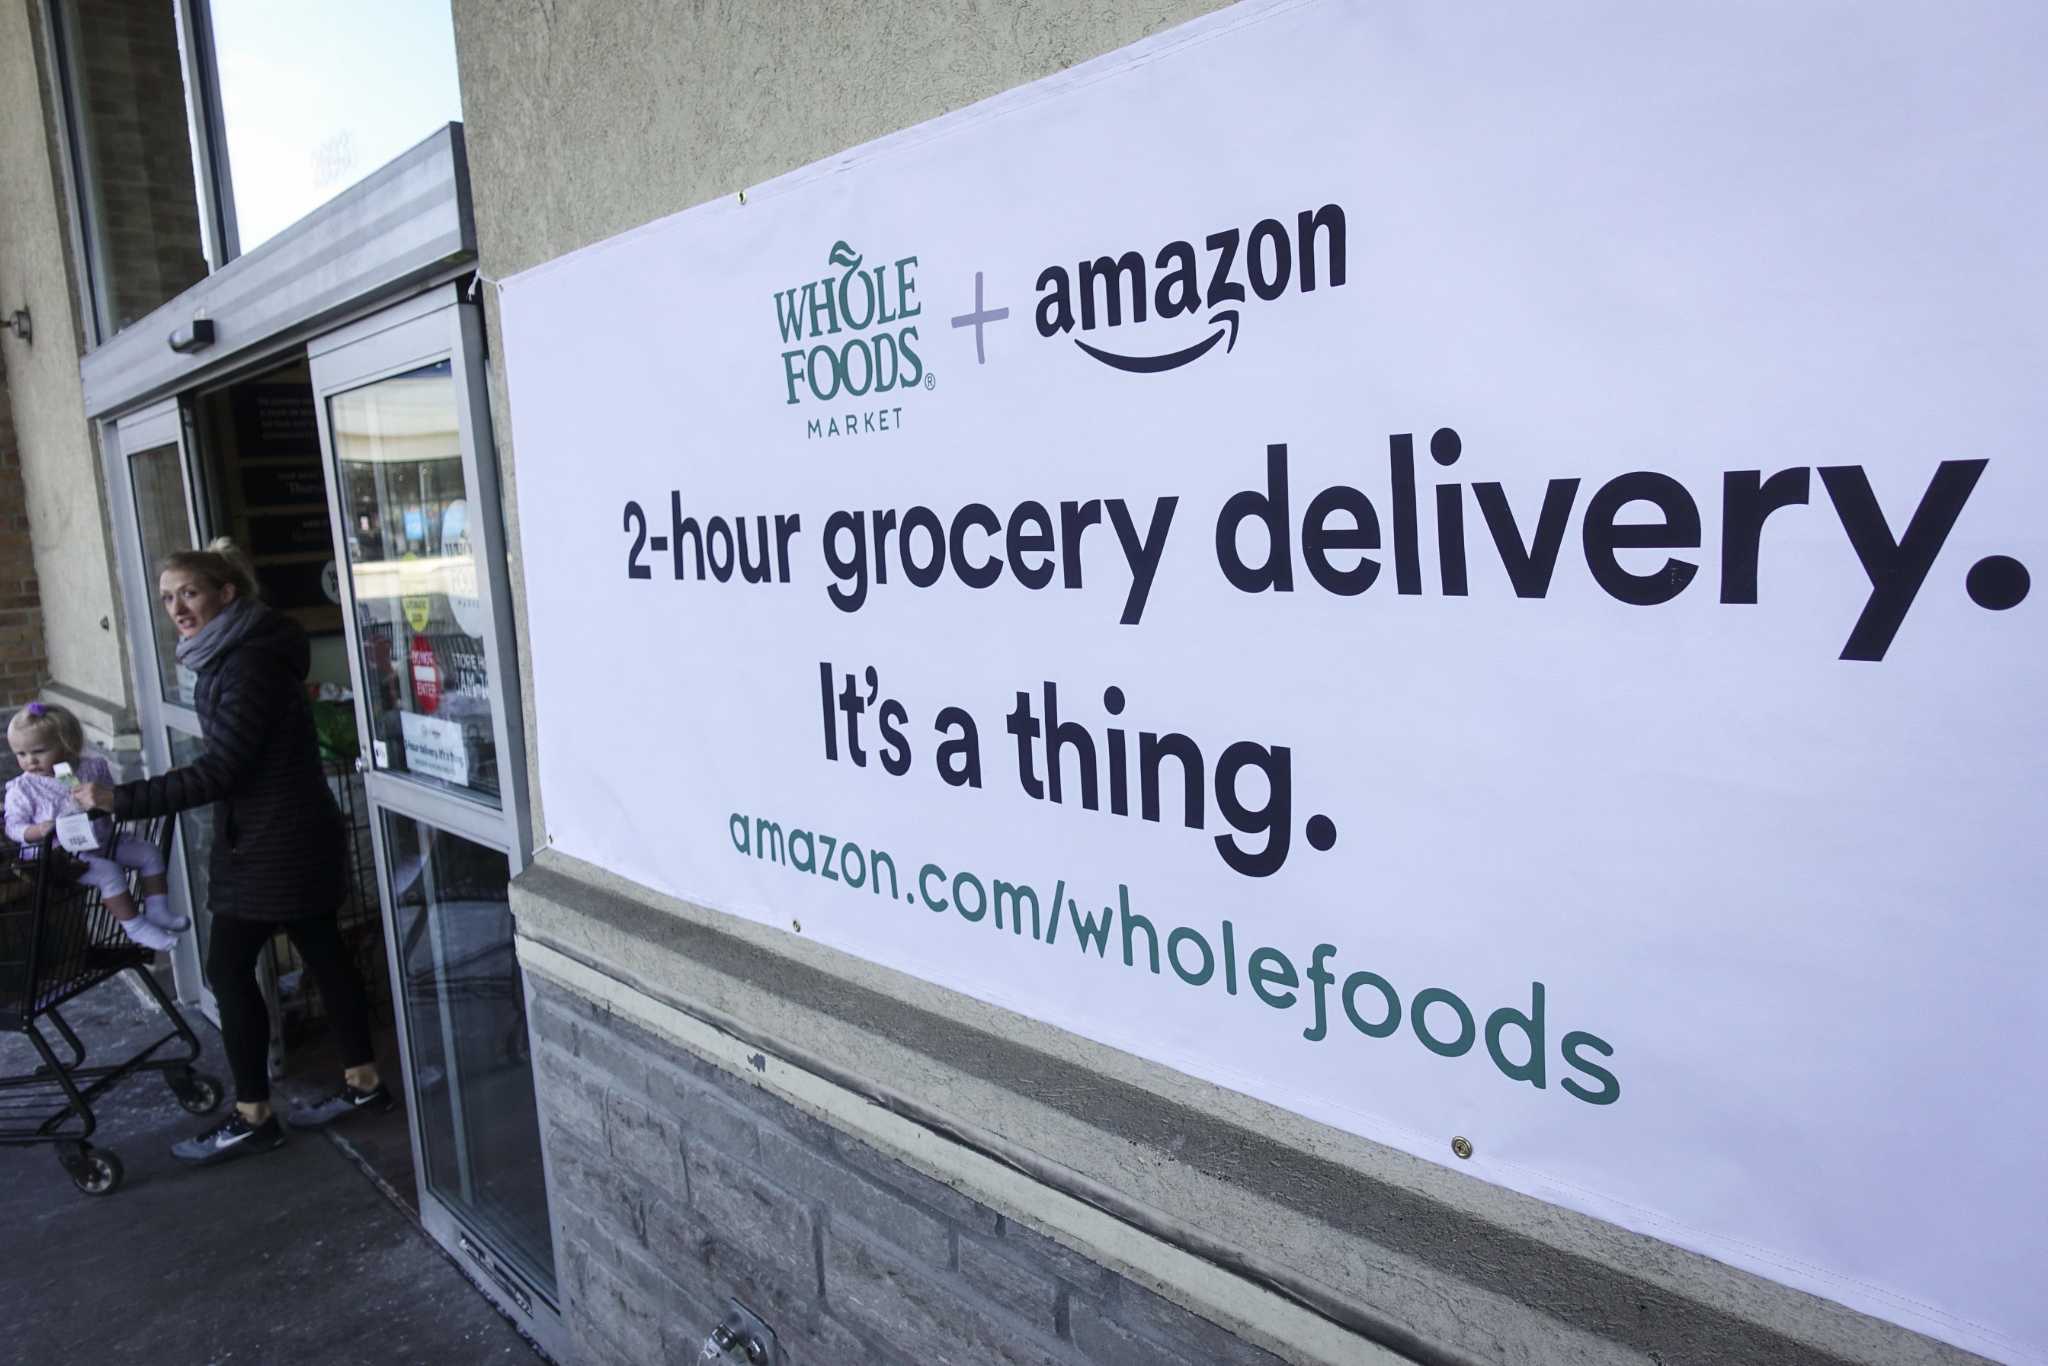 Enables Local Whole Foods Customers With Free 2-Hour Prime Delivery  - Eater SF